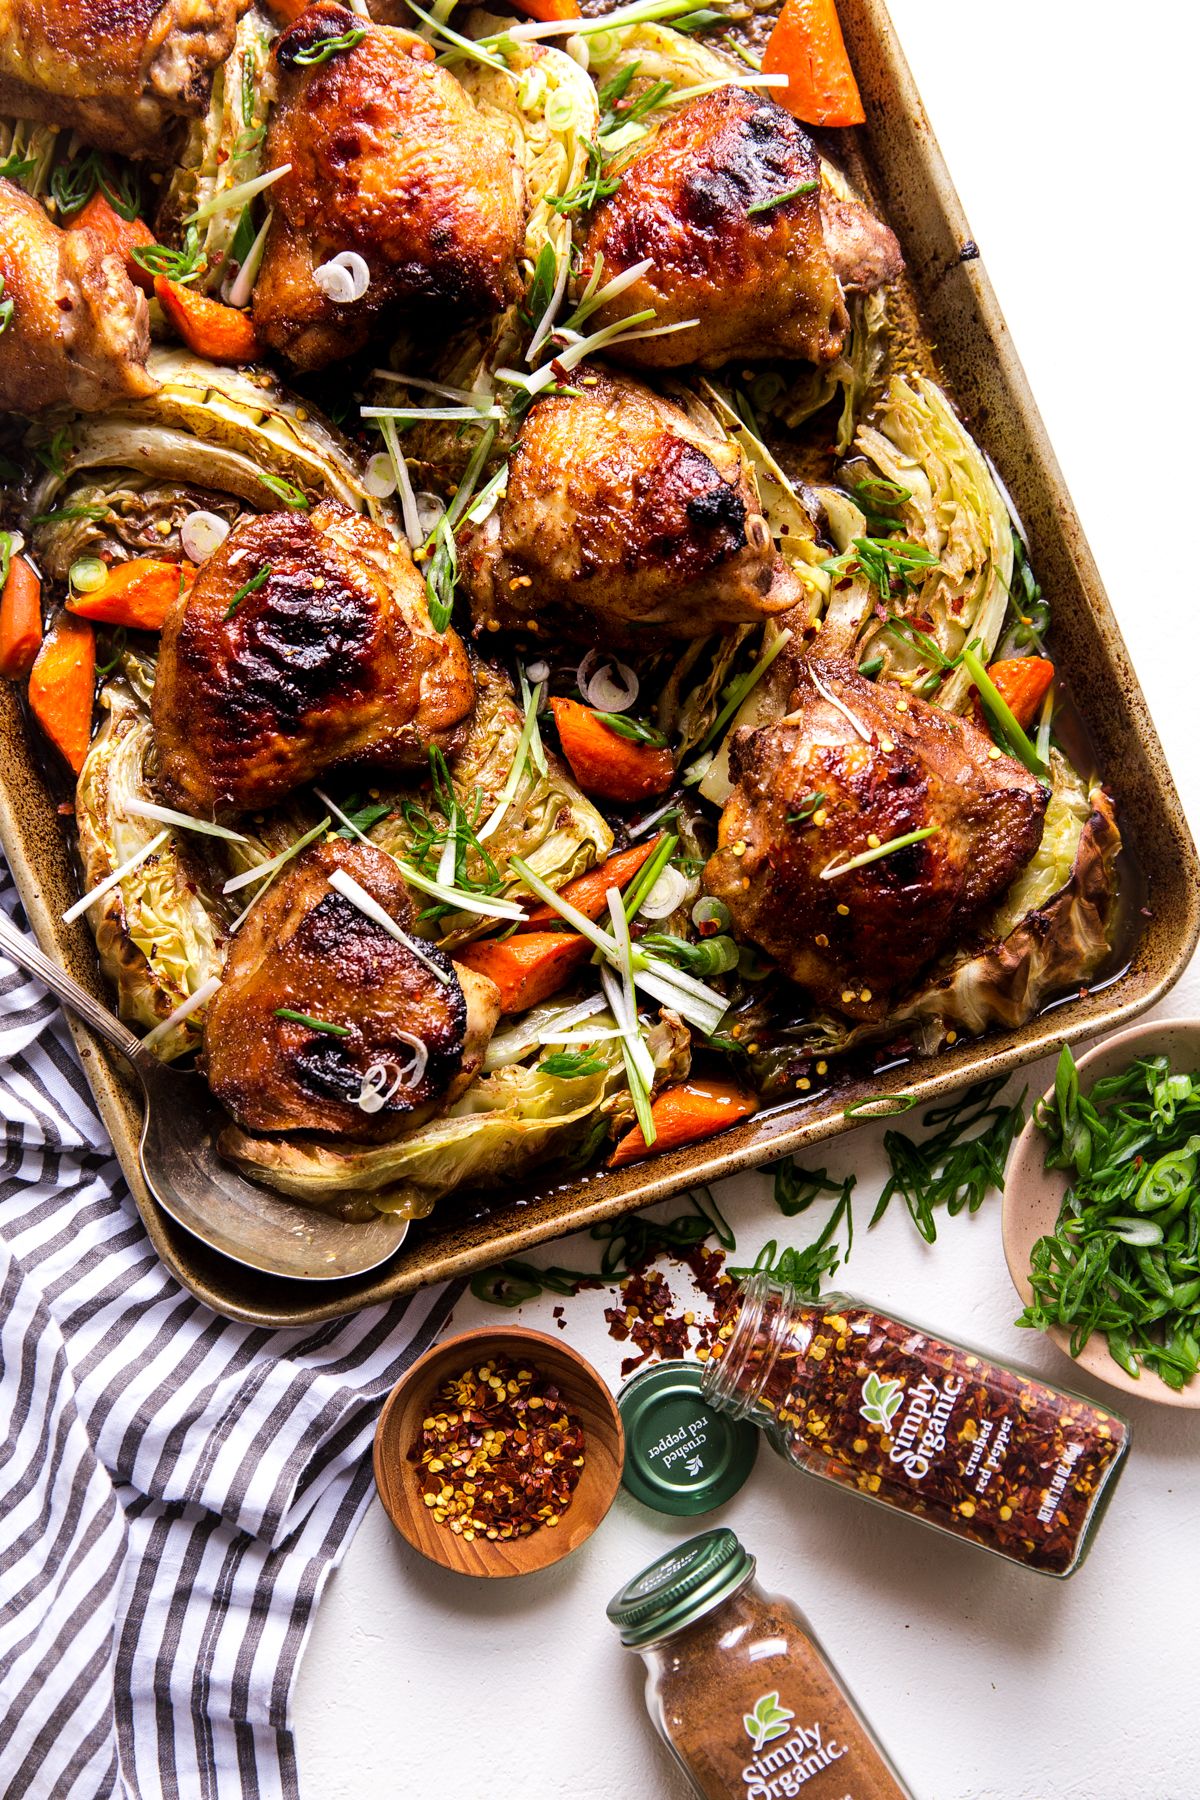 Five Spice Roasted Chicken With Carrots And Cabbage By Themodernproper Quick Easy Recipe The Feedfeed